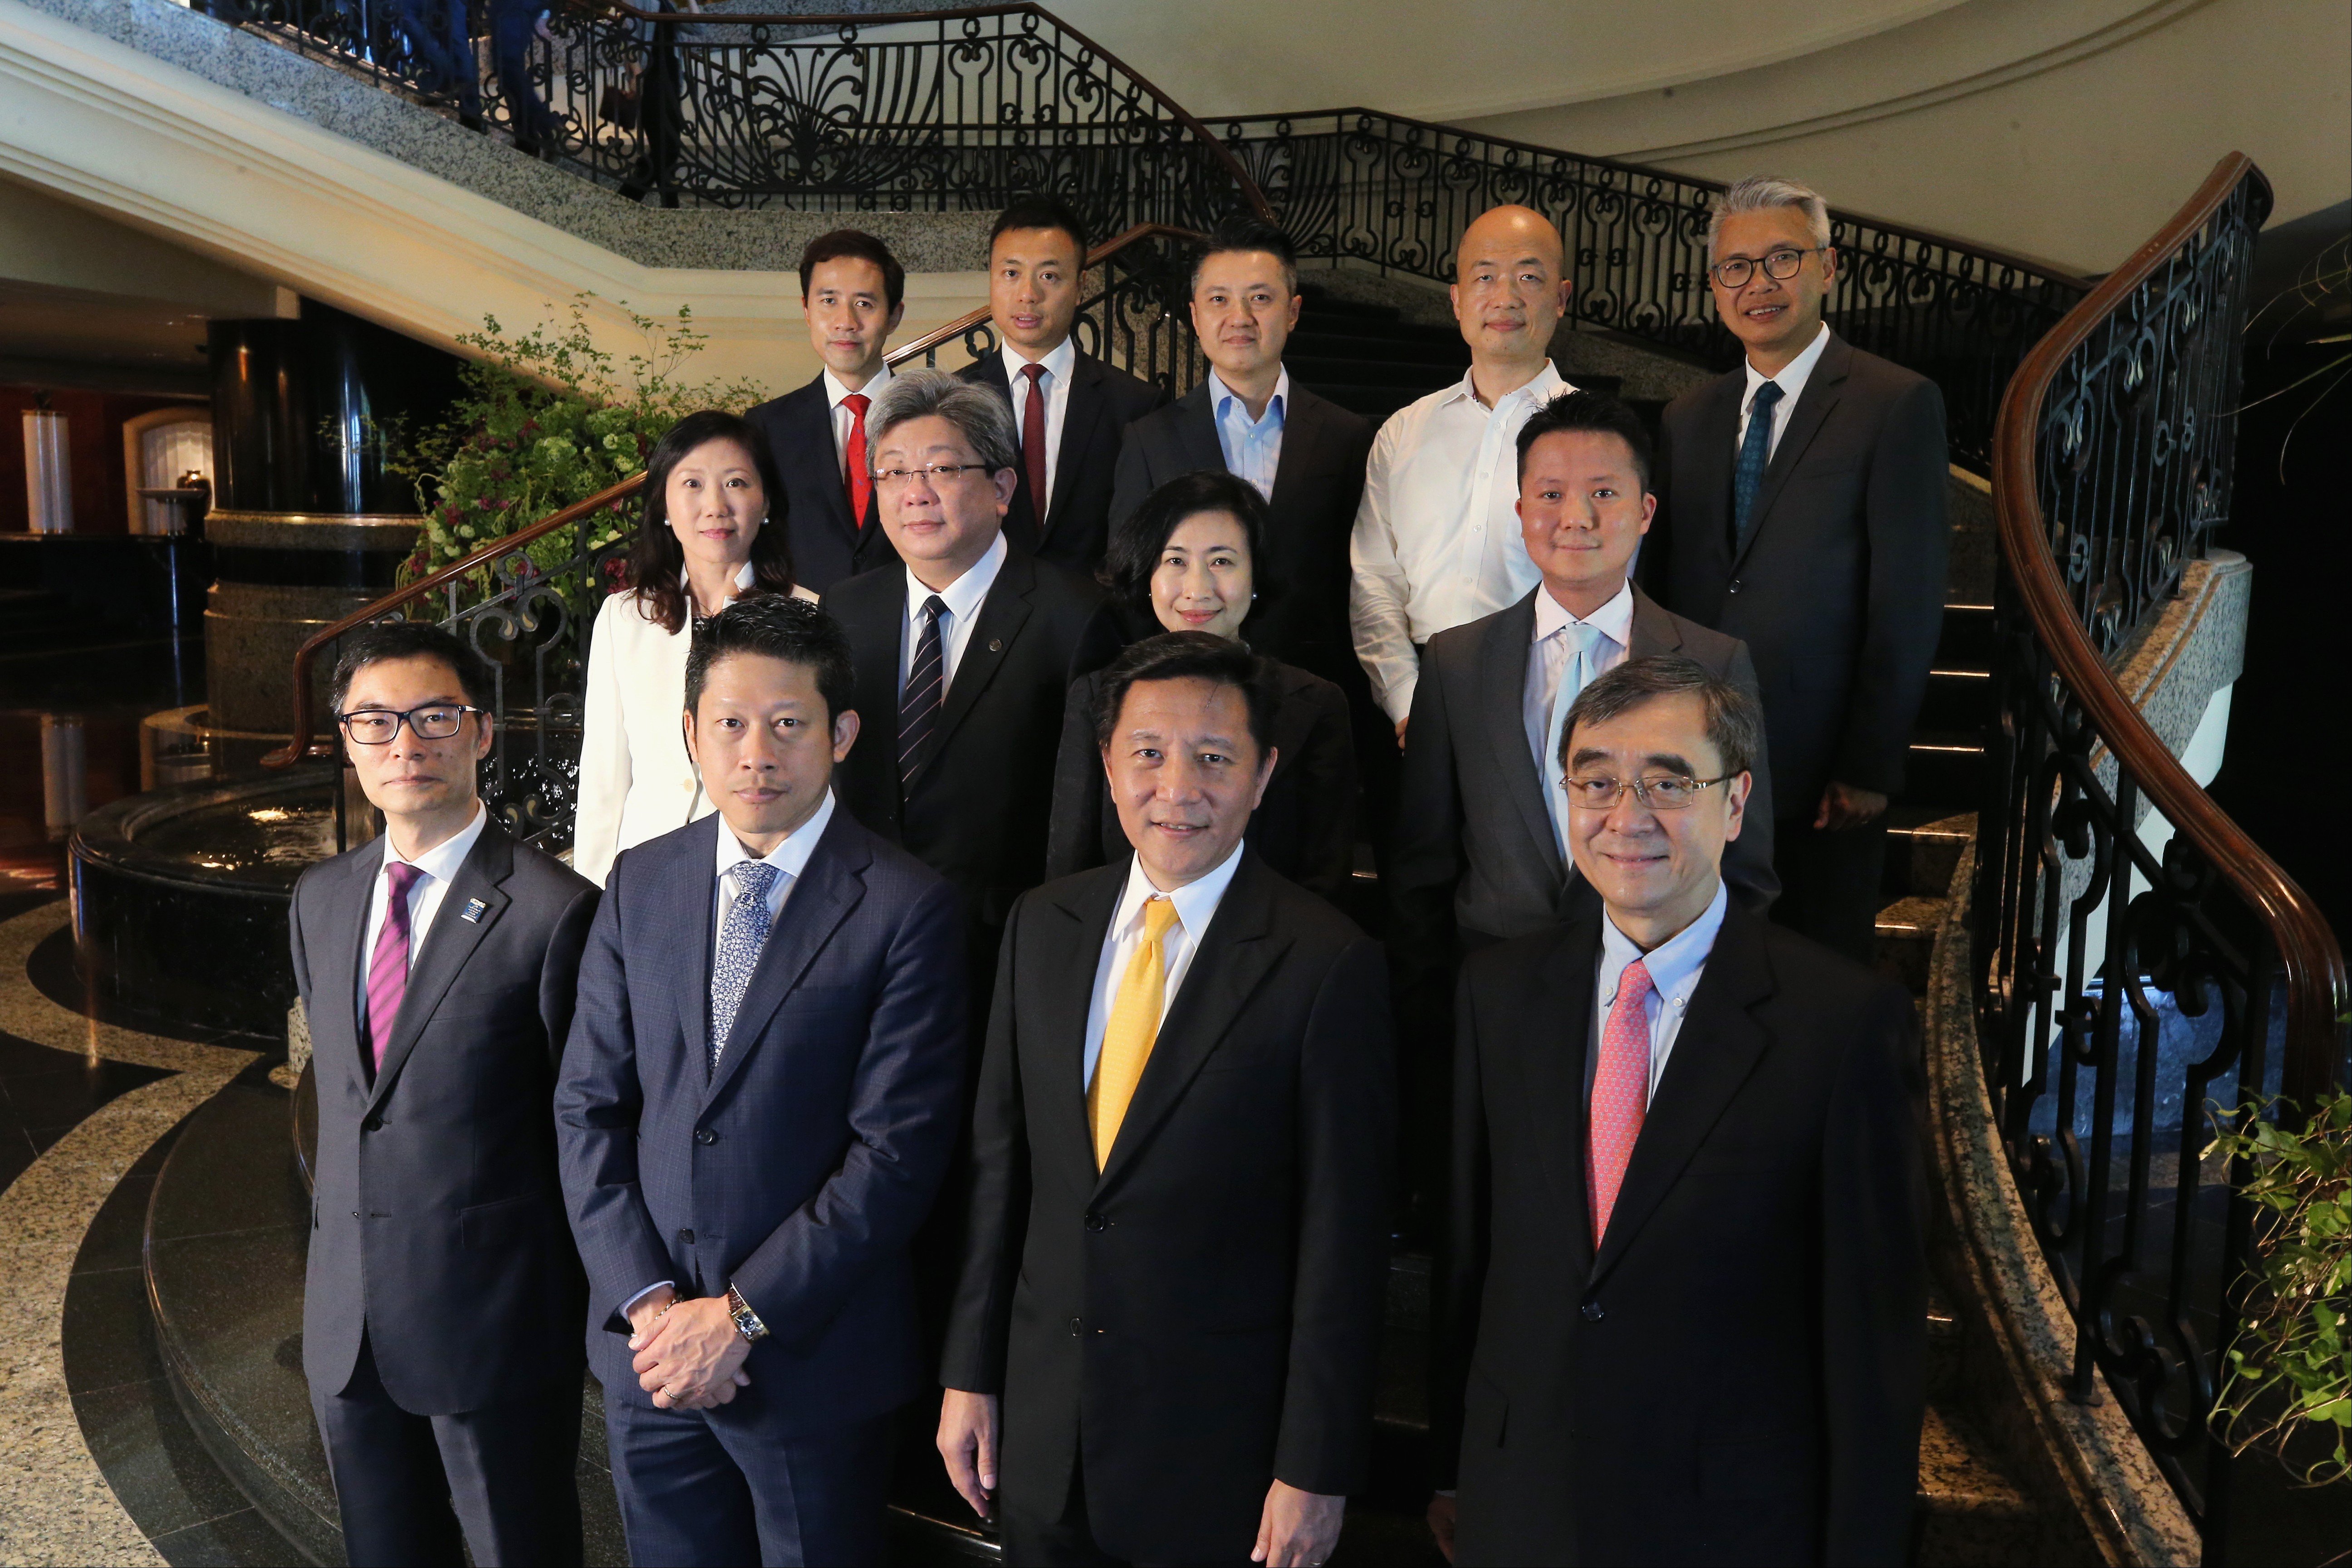 (front row left to right): Jeffrey Chan, FCPA, Councillor, CPA Australia; Eugene Tang, South China Morning Post; Herbert Vongpusanachai, Senior Vice President, Managing Director, DHL Express Hong Kong and Macau; and Professor Richard Wong, Professor of Economics, the University of Hong Kong. (middle row left to right): Iris Wong, Director, Belt and Road & External Relations, Hong Kong Trade Development Council; Samson Lam, Executive Chairman, VPower Group International Holdings Limited; Lianne Ng, Group Director, External Affairs & Sustainability, Vitasoy International Holdings Limited; and David Pun, Chairman & CEO of EVISU Group Limited. (back row left to right): Ronald Kan, 2018 National President, Junior Chamber International Hong Kong; Lap Man, Founder and Chief Executive Officer, DYXnet Group; Ray Chan, President of Central Business Information Limited; Zhou Jiaxing, Managing Director & Head of Legal, China International Capital Corporation Limited; and Terence Chiu, Head of Comm